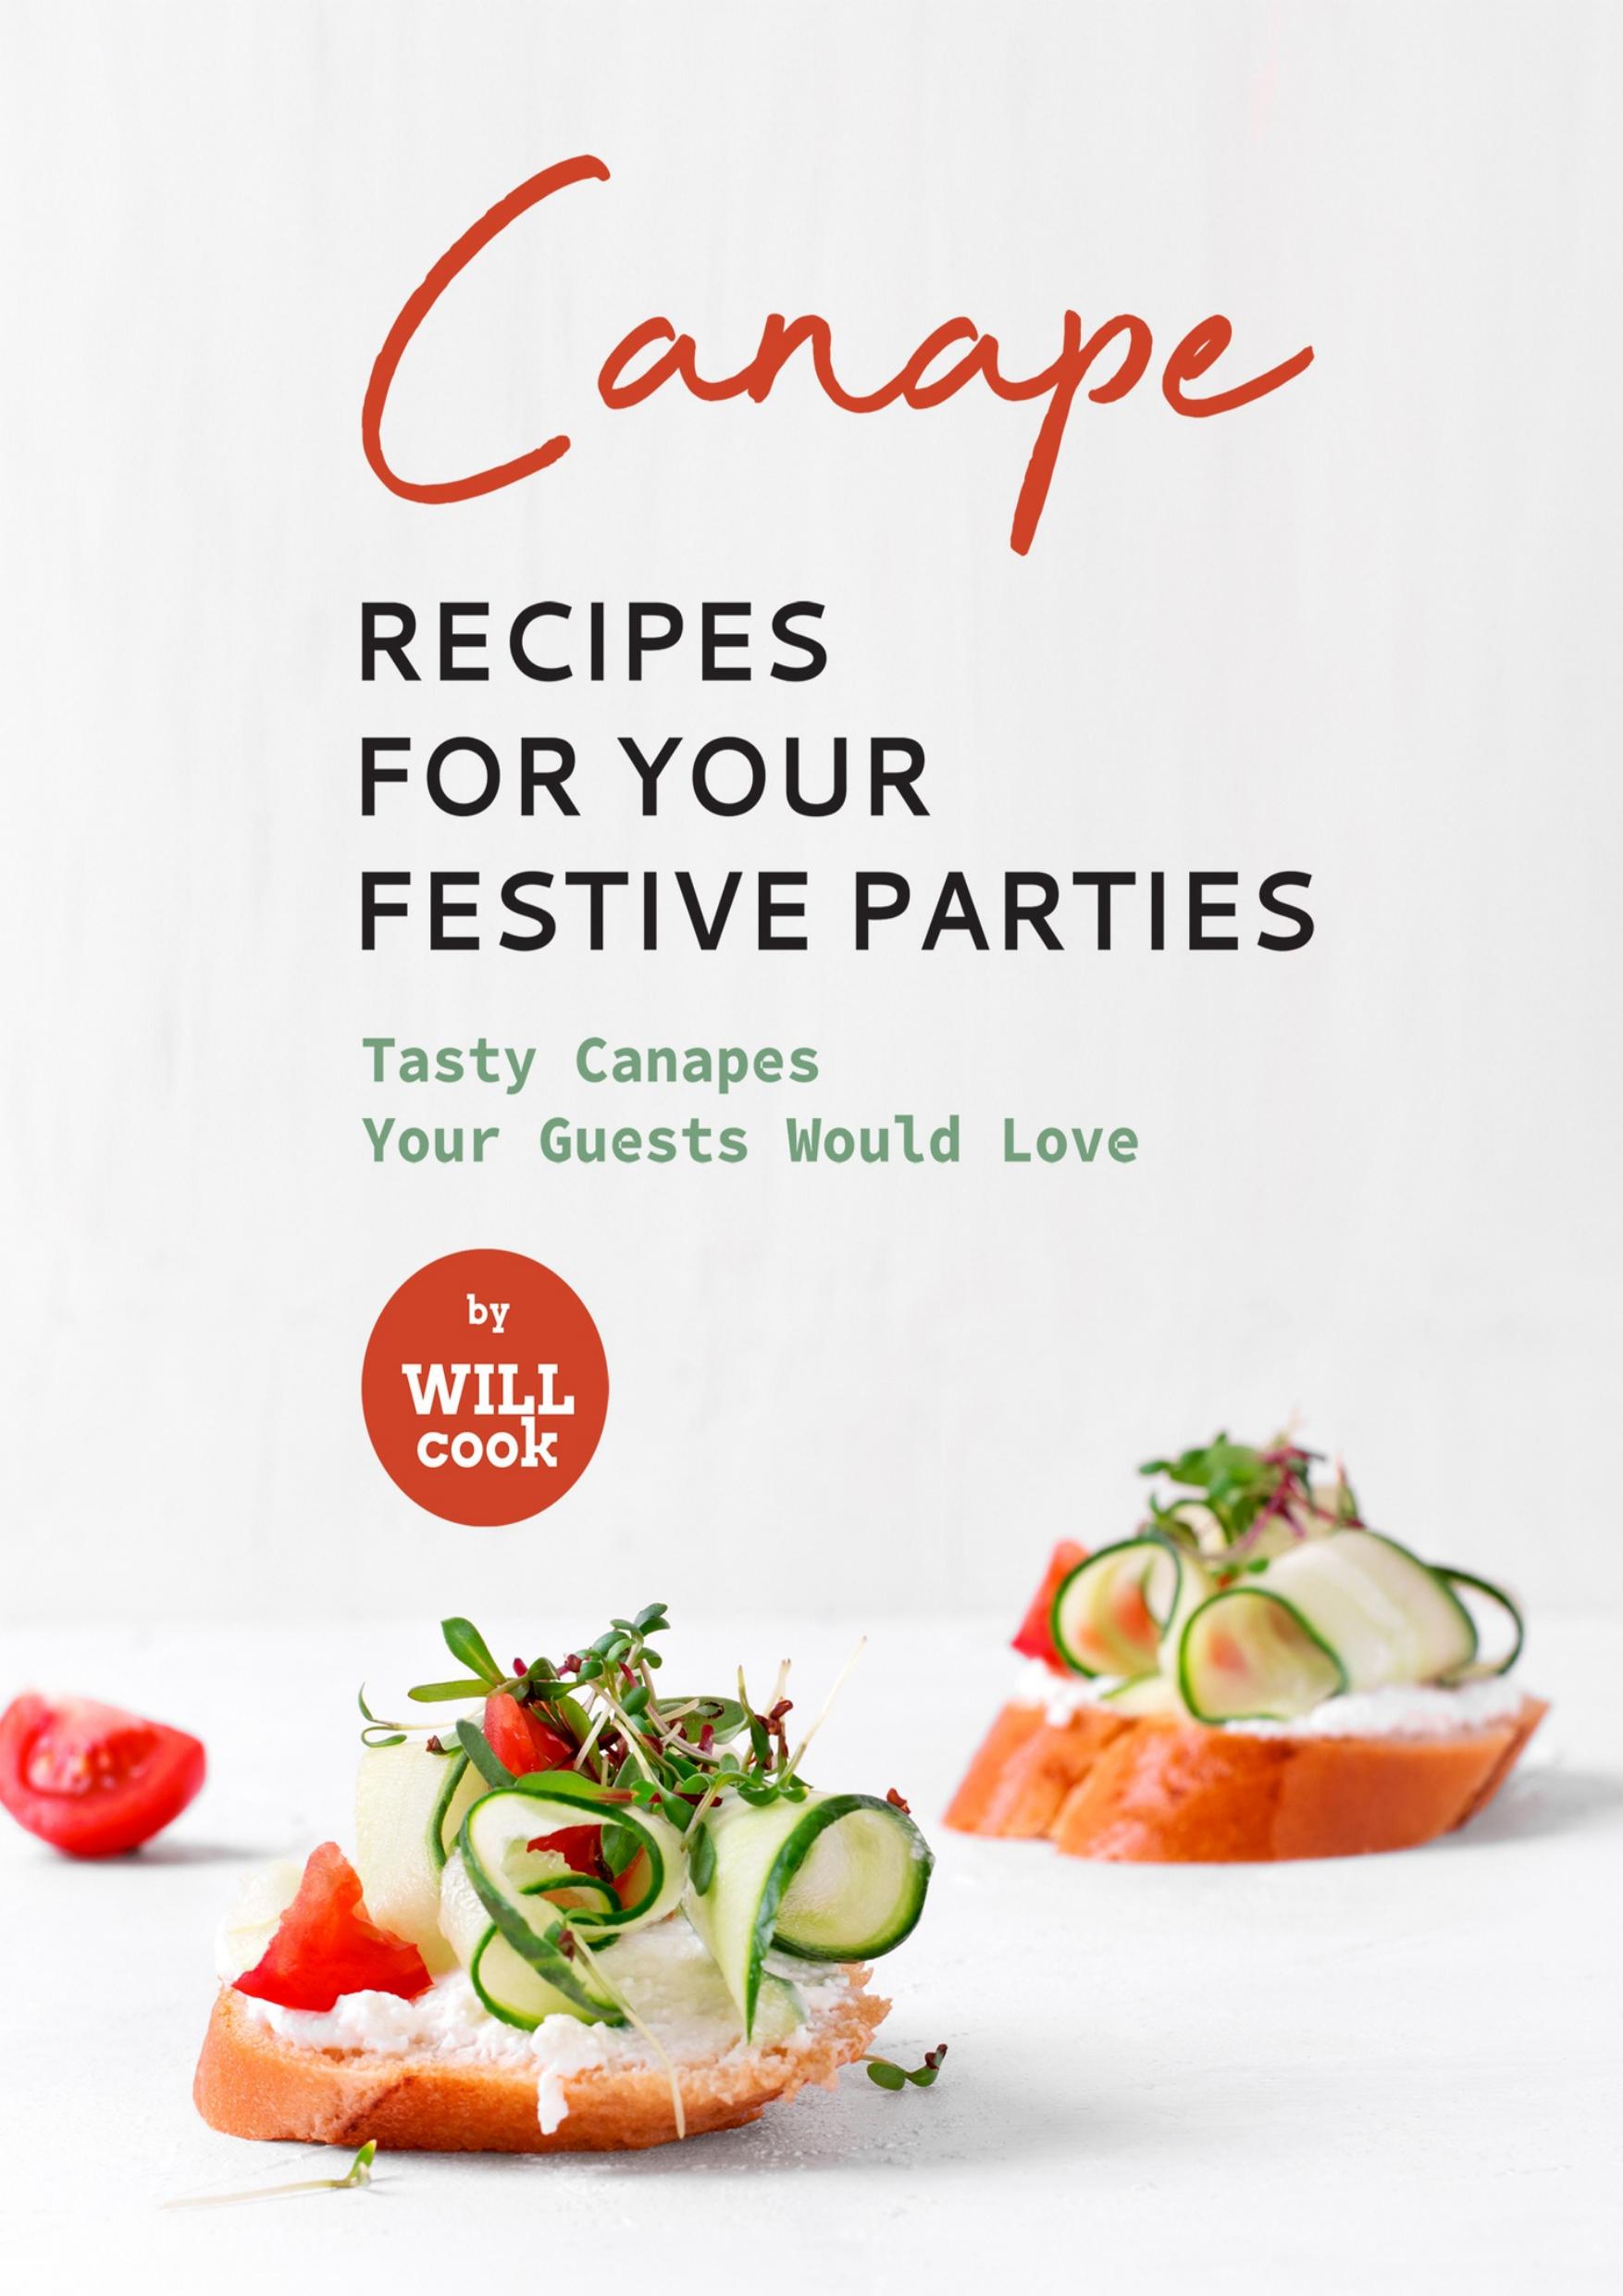 Canape Recipes for Your Festive Parties: Tasty Canapes Your Guests Would Love by Cook Will